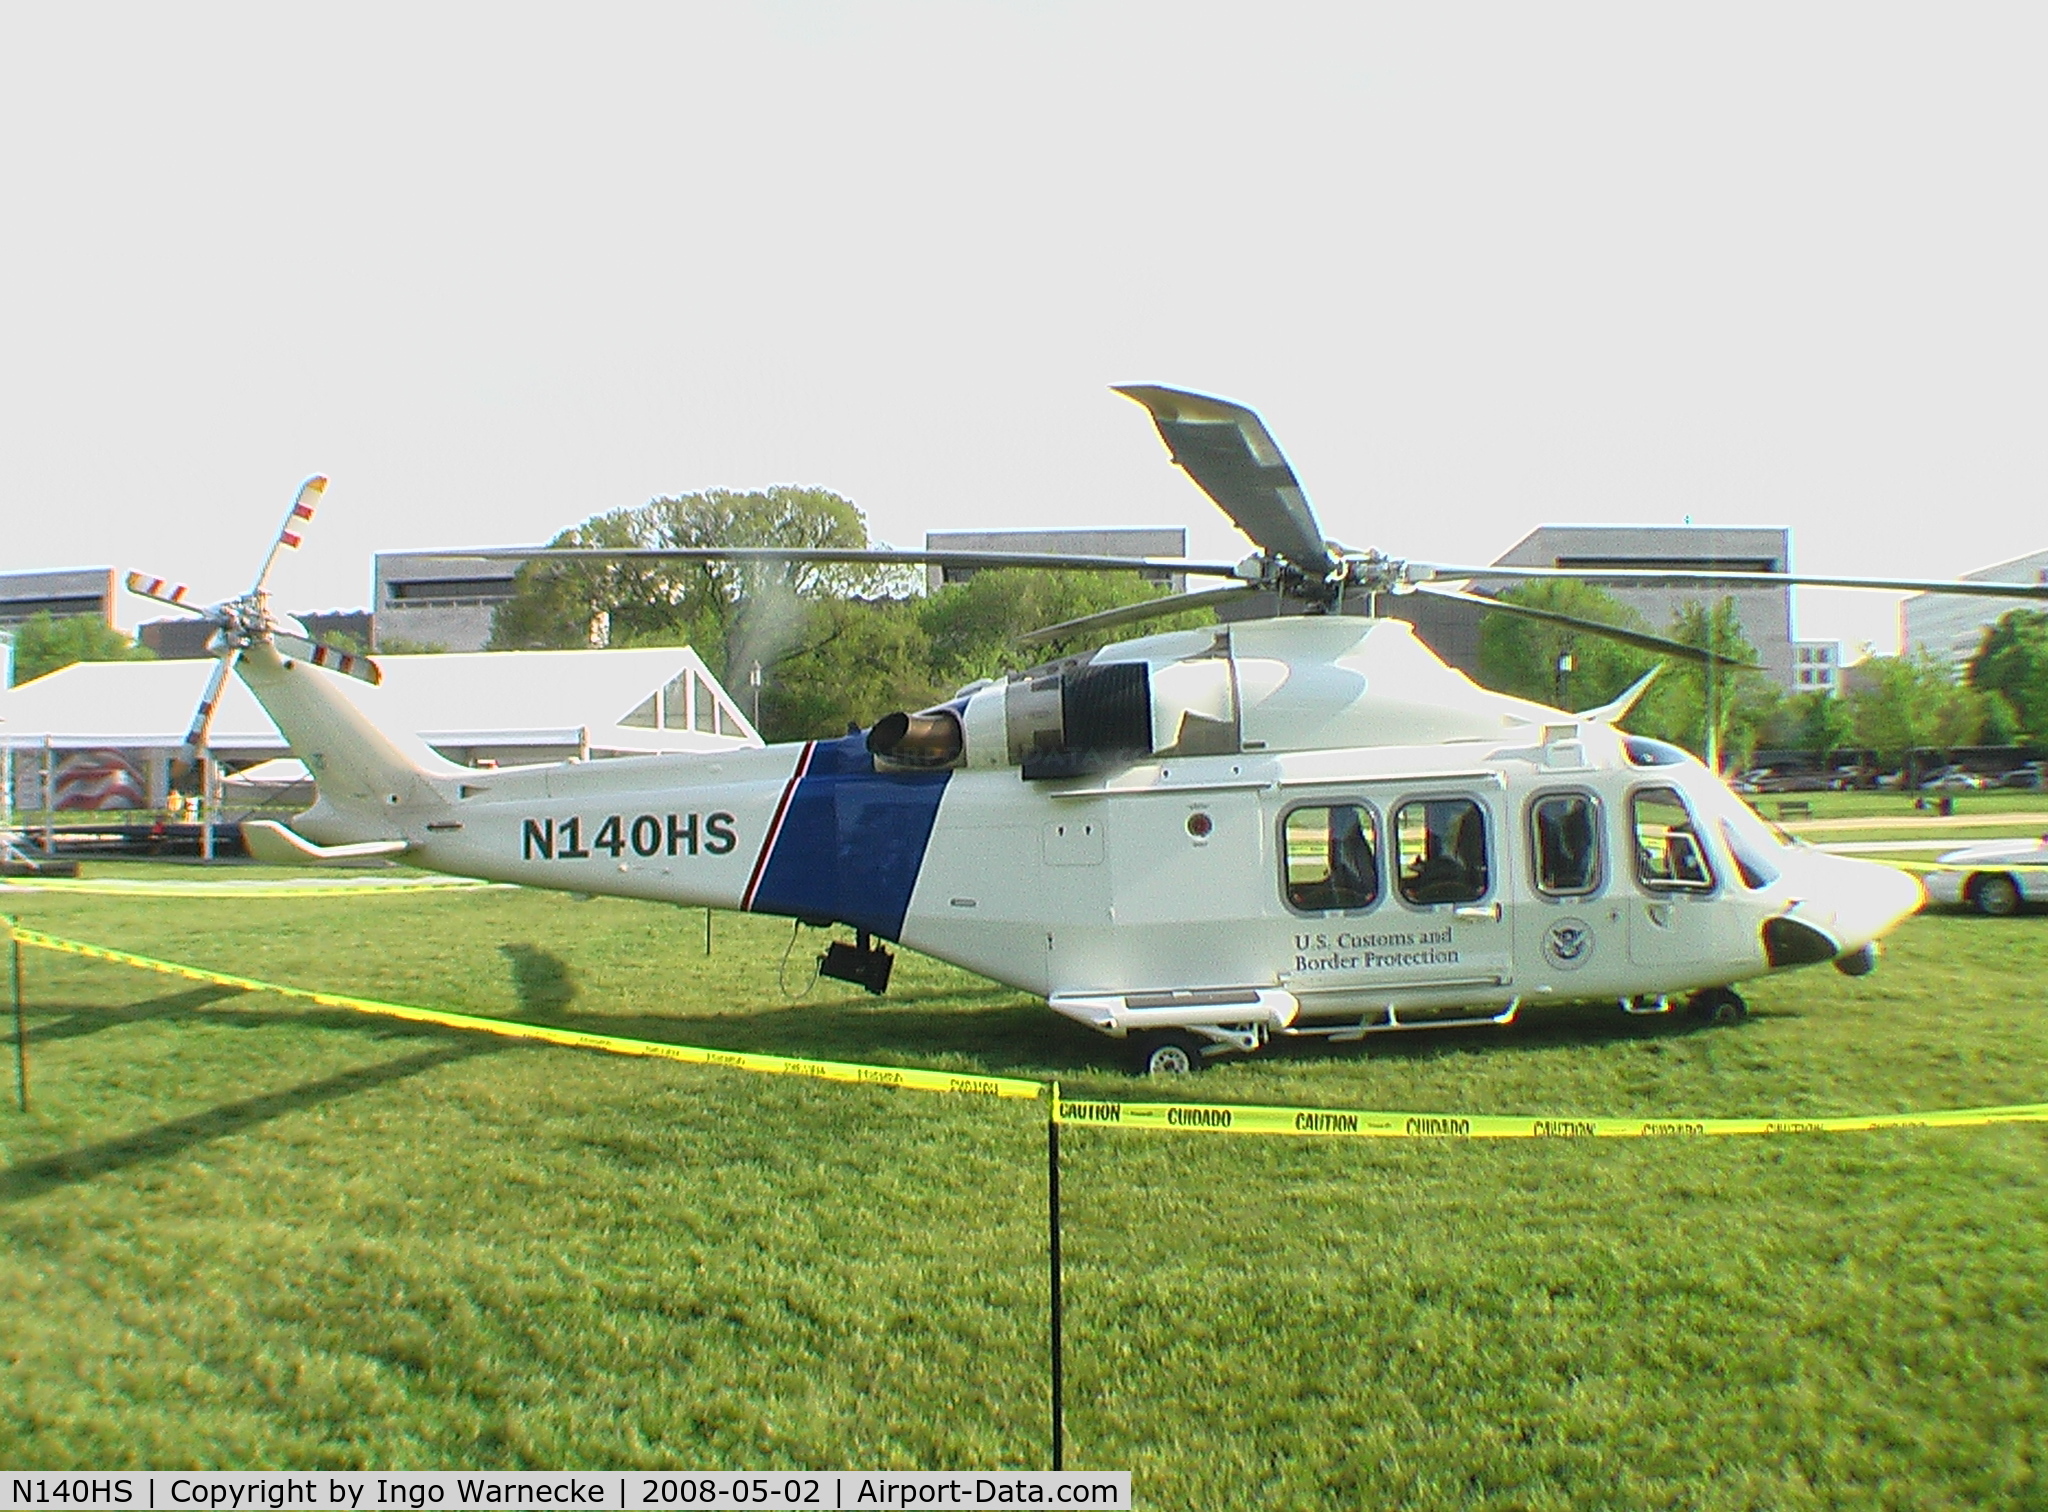 N140HS, 2006 Agusta AB139 C/N 31036, Agusta AB.139 of US Customs and Border Protection on the National Mall for National Public Service Appreciation Week